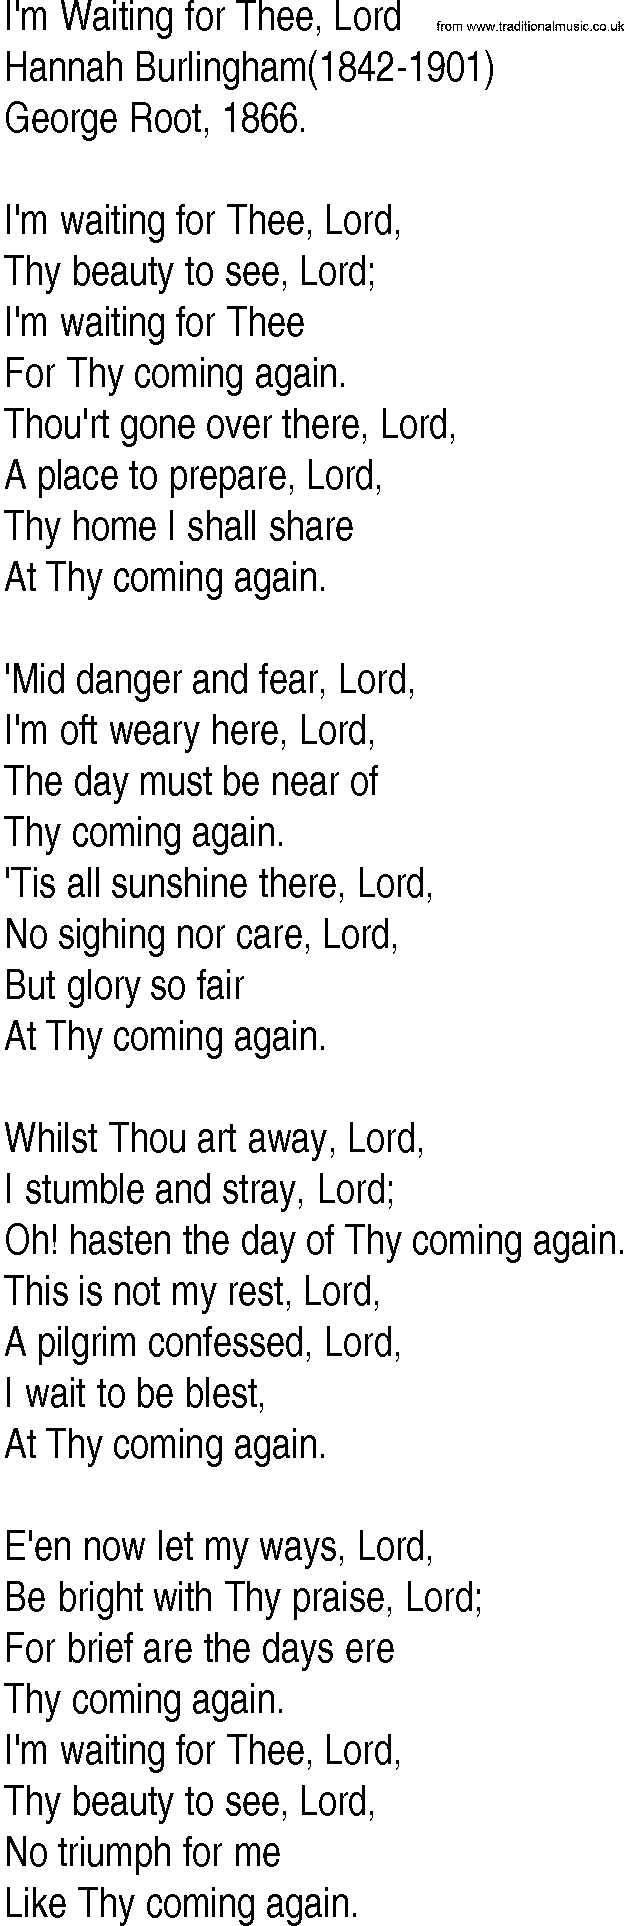 Hymn and Gospel Song: I'm Waiting for Thee, Lord by Hannah Burlingham lyrics